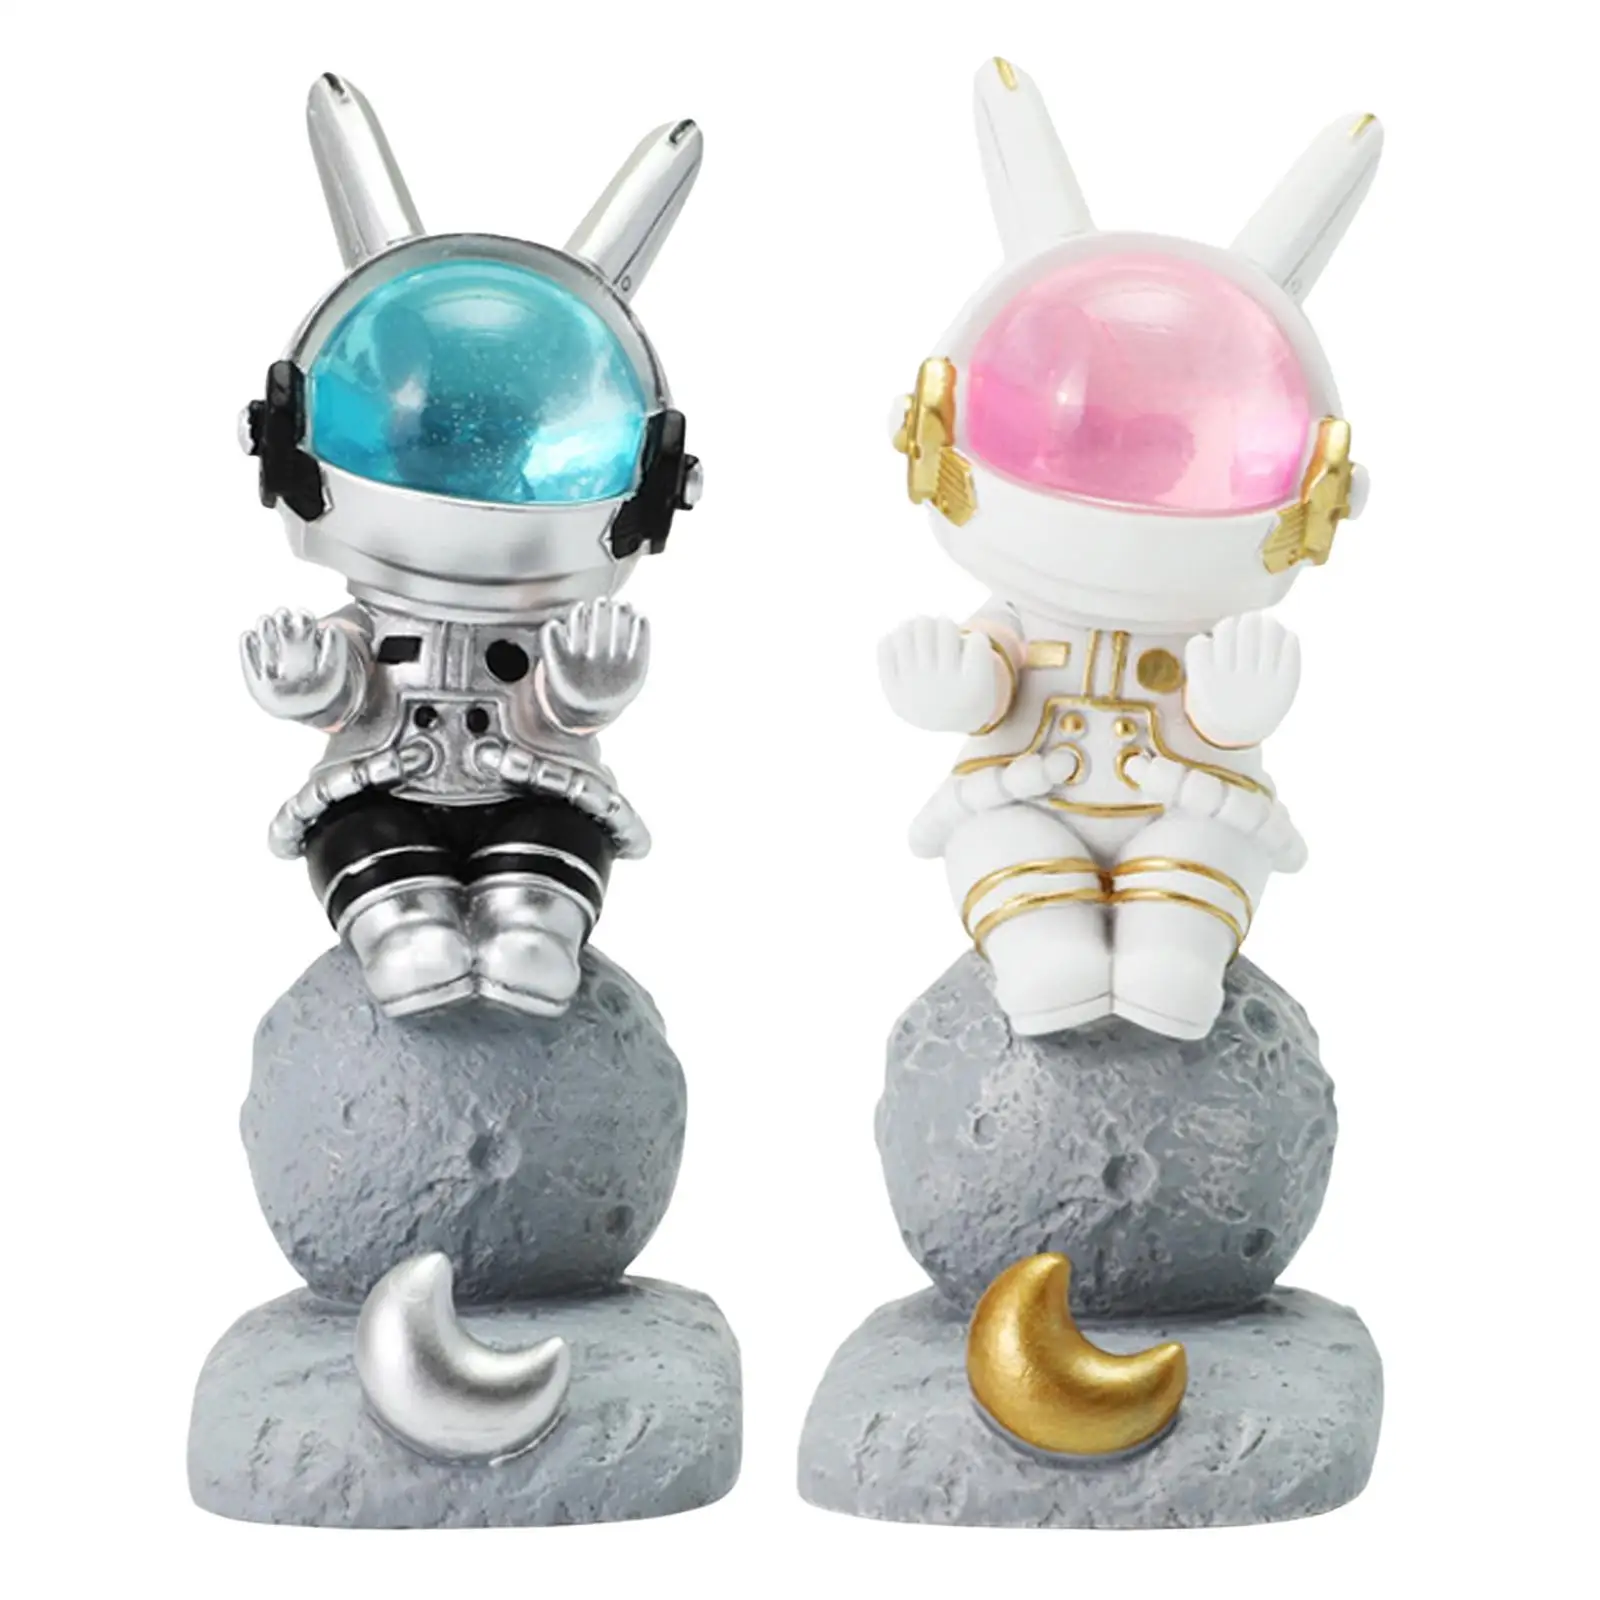 Space Rabbit Phone Holder Support Art Decor Decorative Night Light Bunny Statue Phone Stand for Home Table Car Dashboard Bedroom